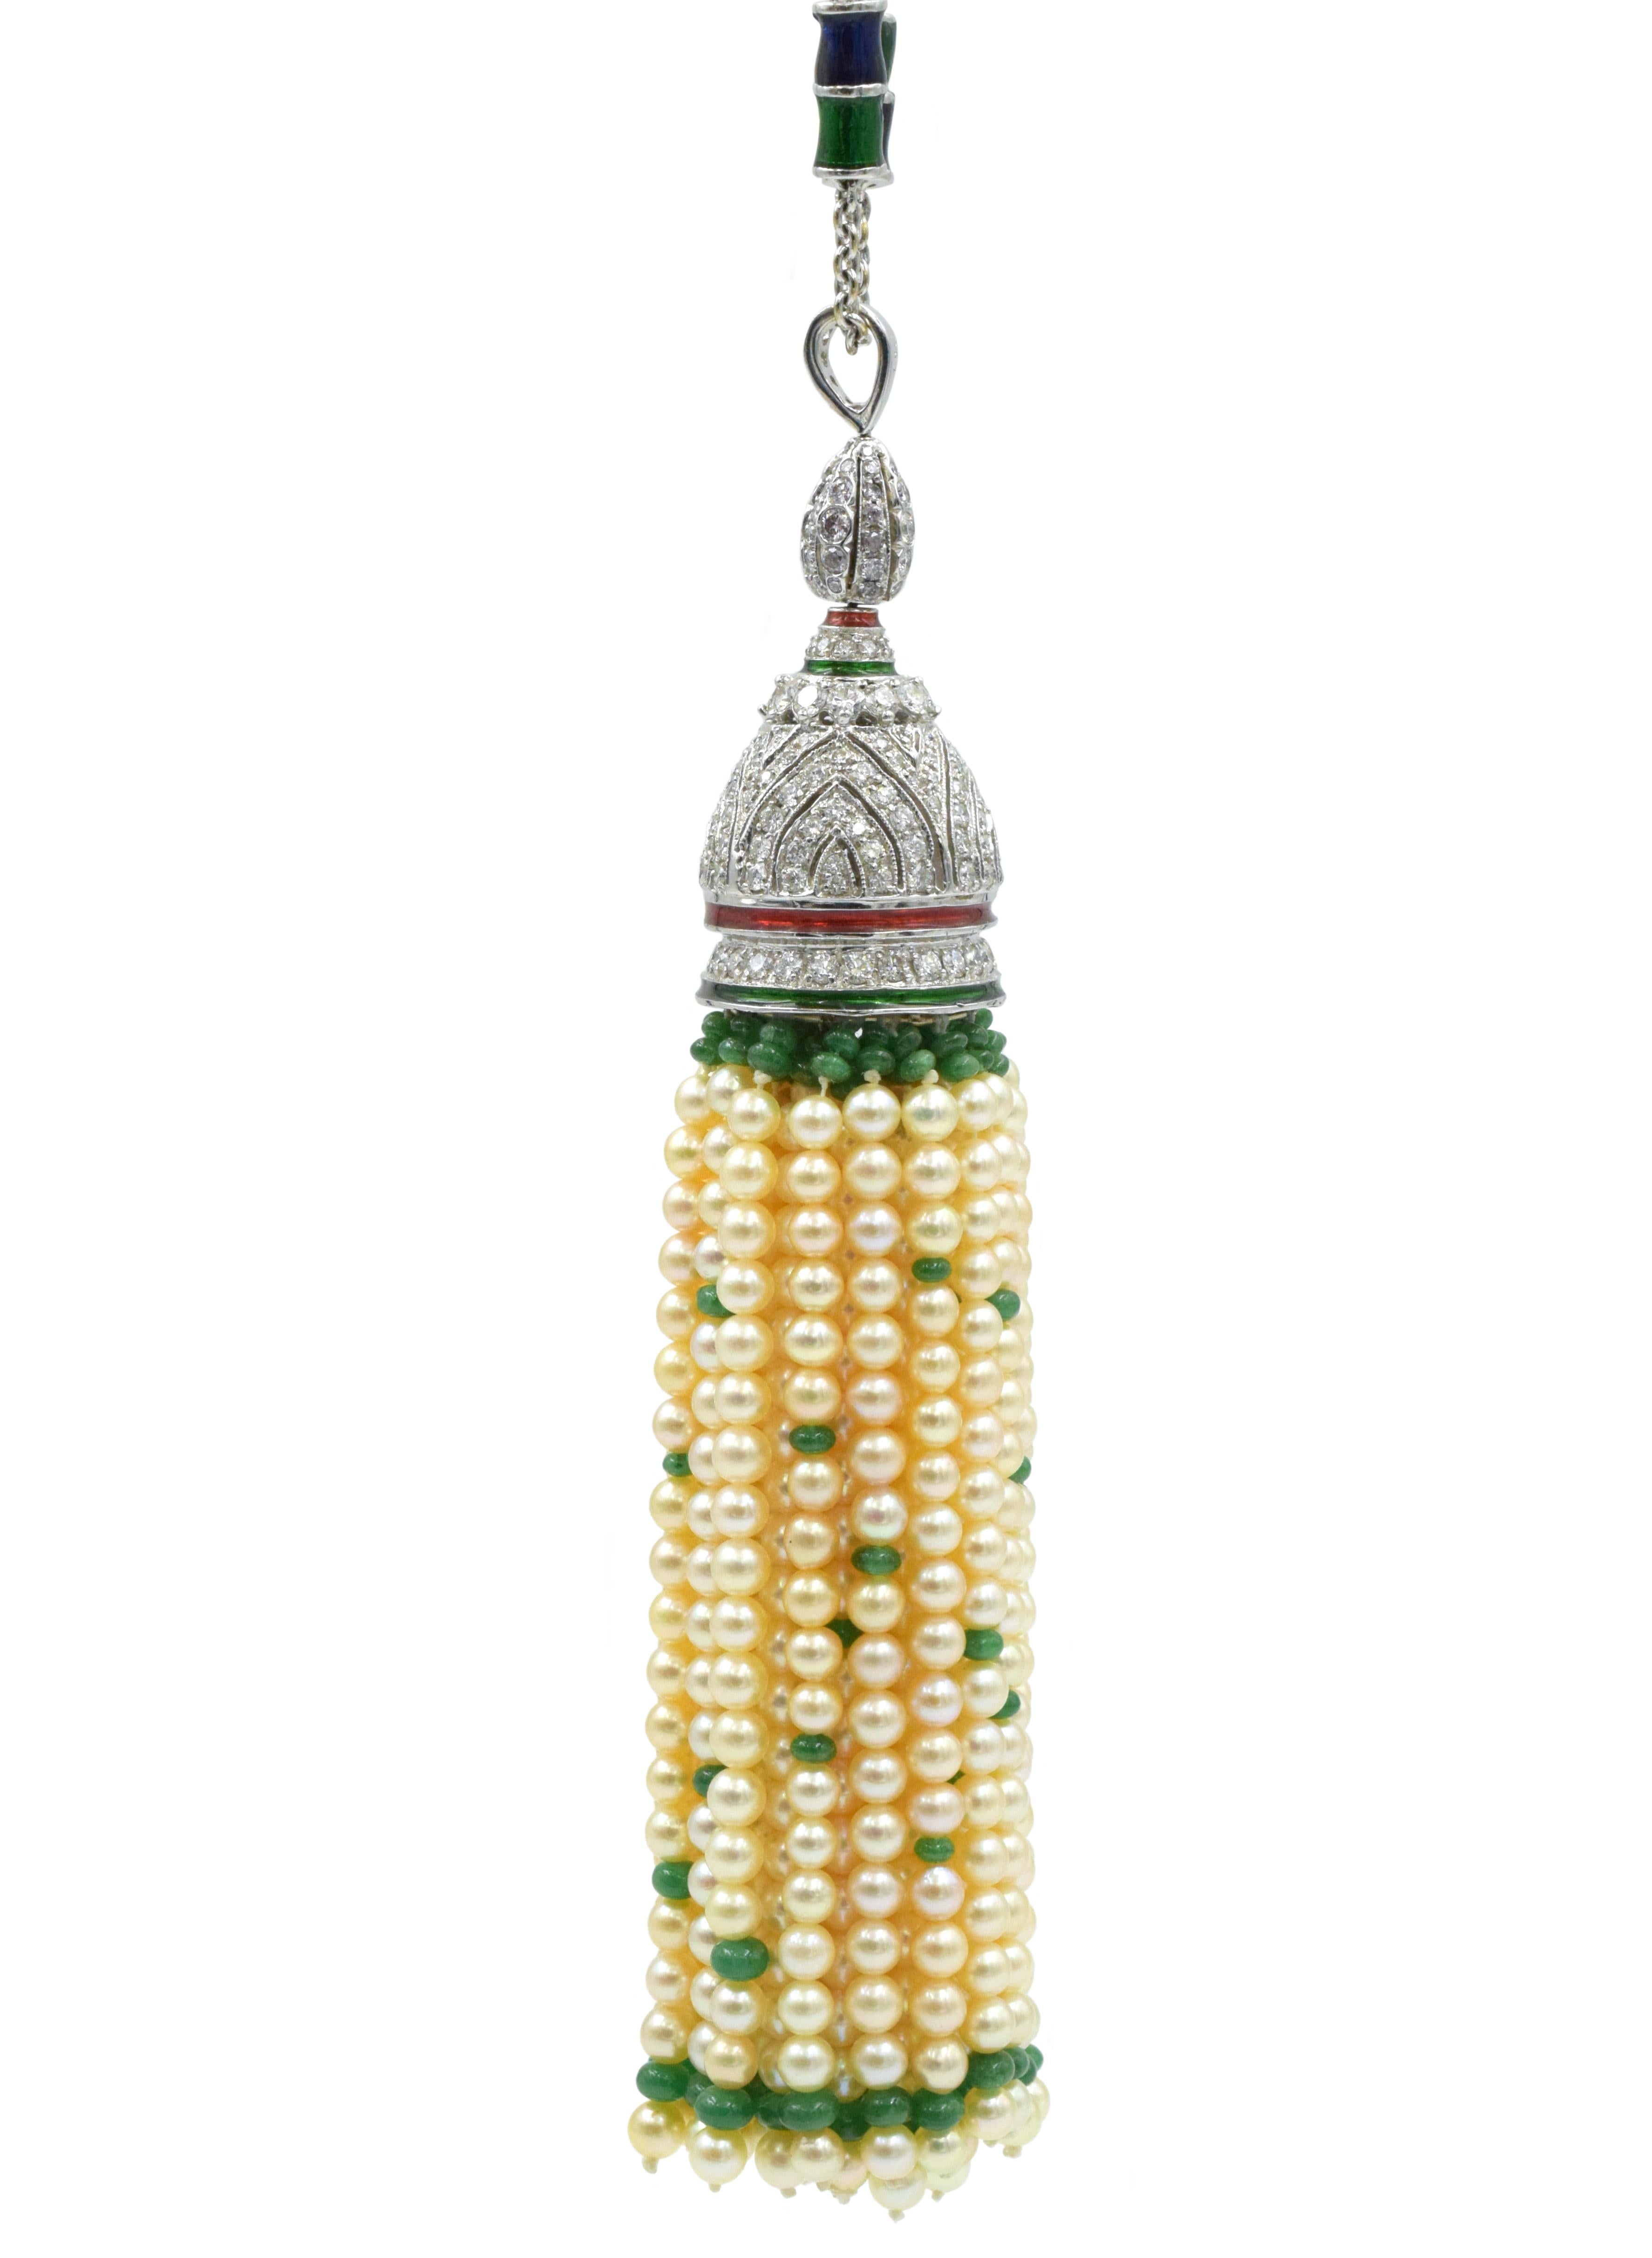 Diamond, Pearl and Emerald sautoir necklace has a pendant with a tassel of pearls and emerald beads and a base with round diamond (198 diamonds weighing approx 5.80 carat) and 18k white gold base with red and green enamel rings. 
The chain has blue